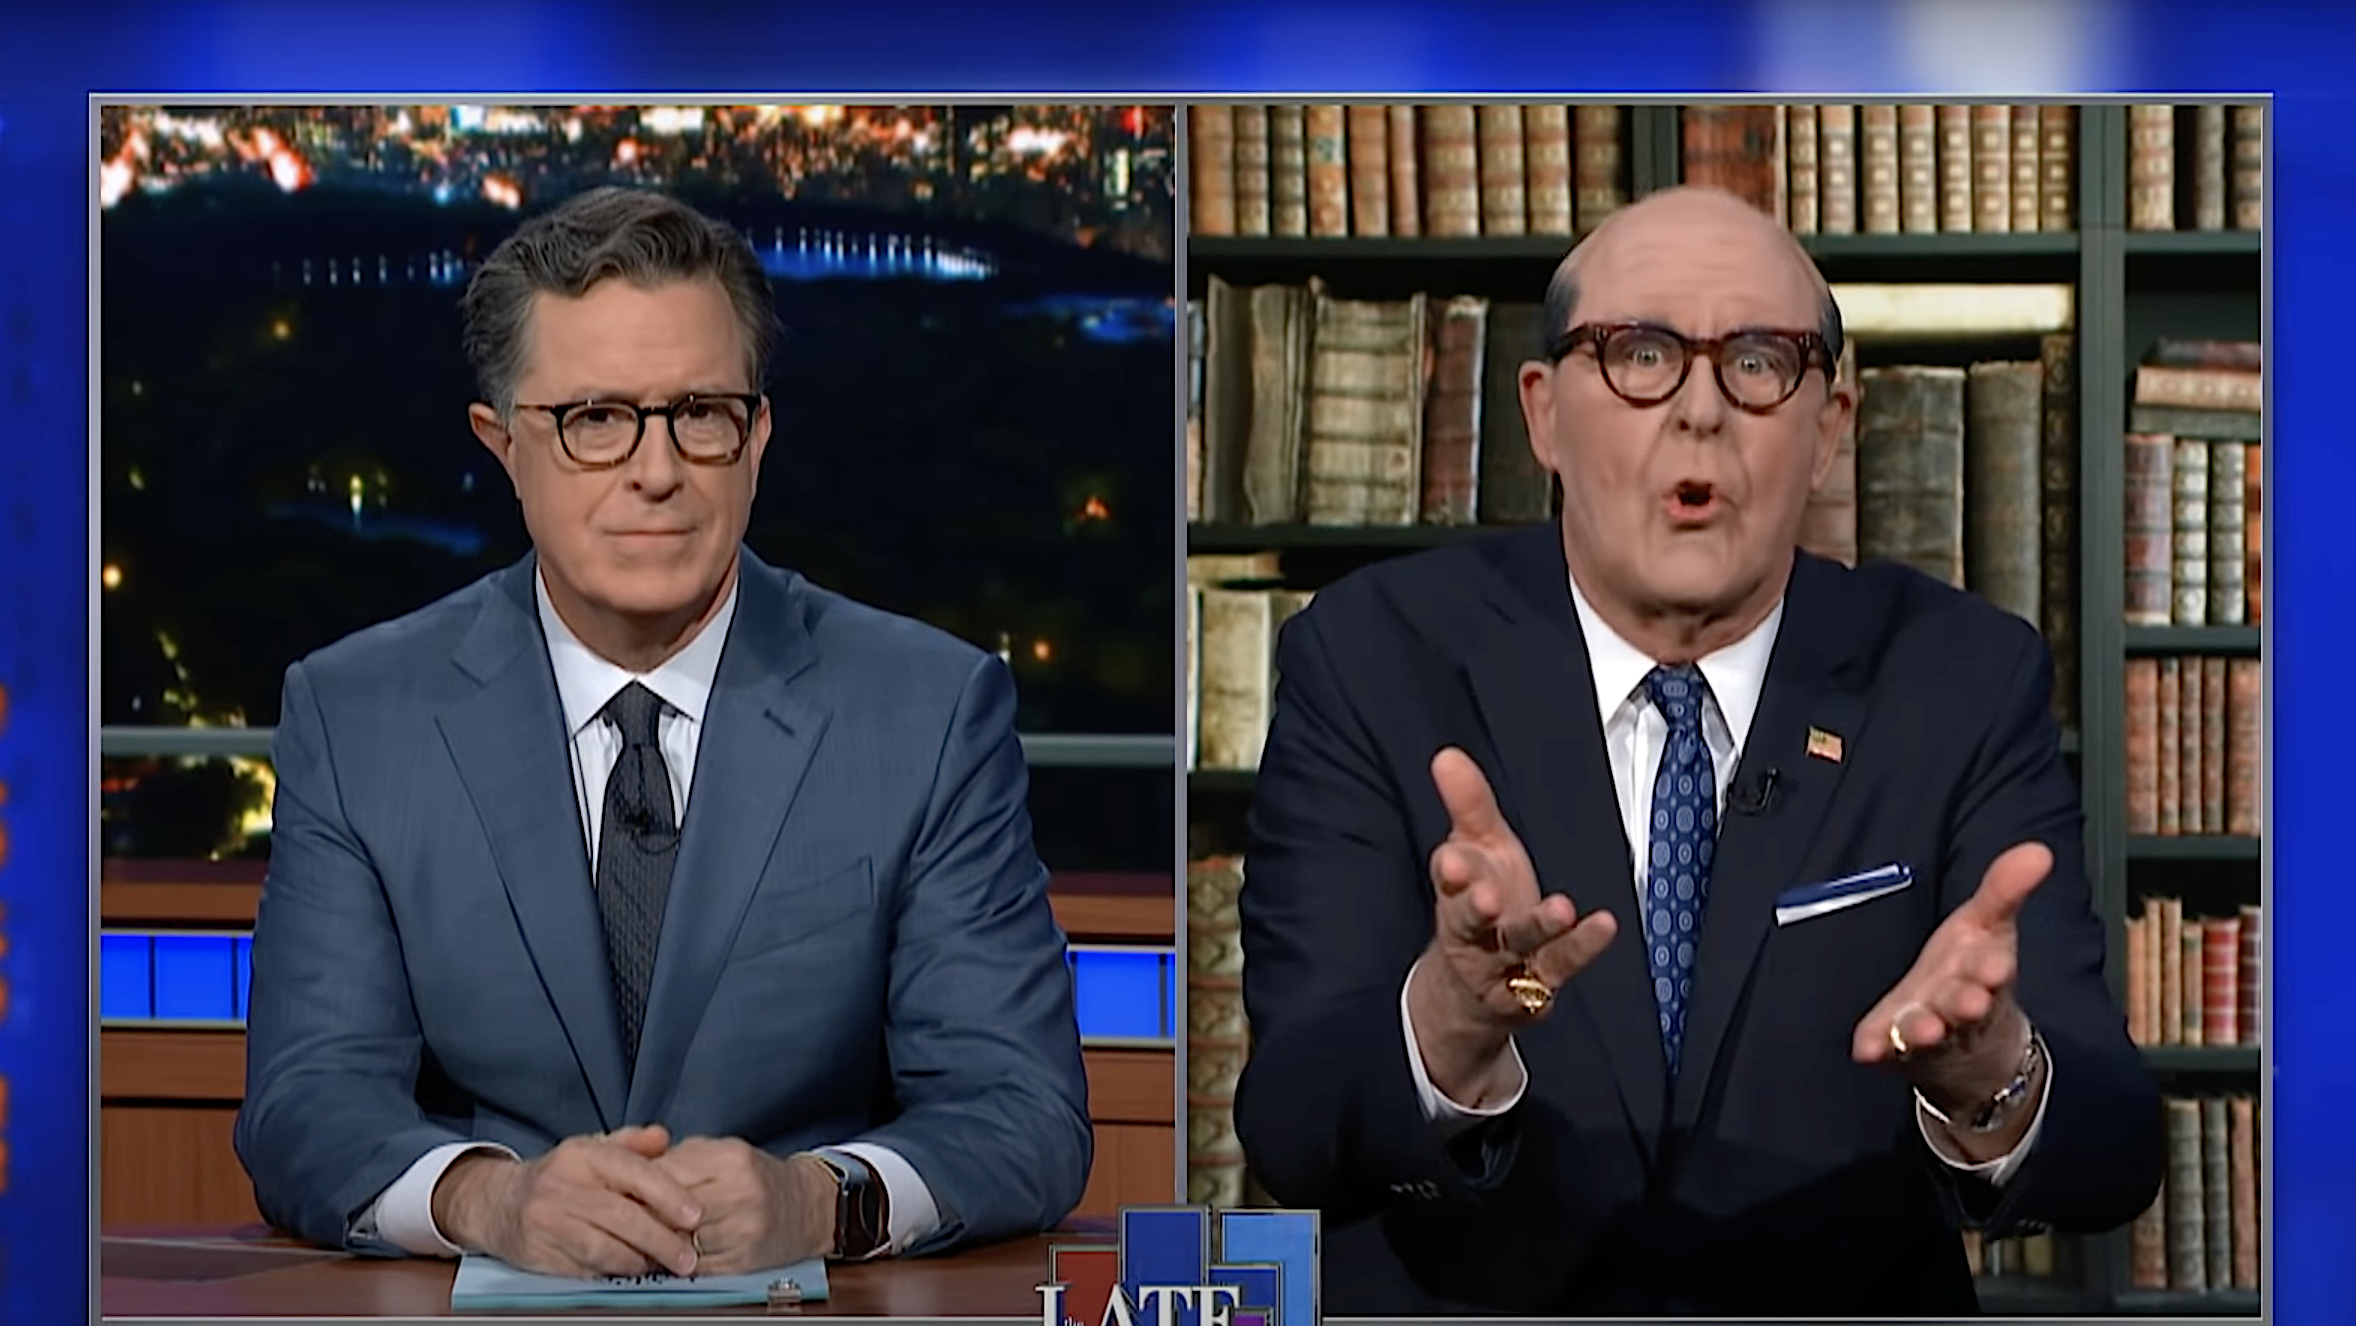 Banned from Fox News, John Lithgow’s Rudy Giuliani stumbles onto The Late Show